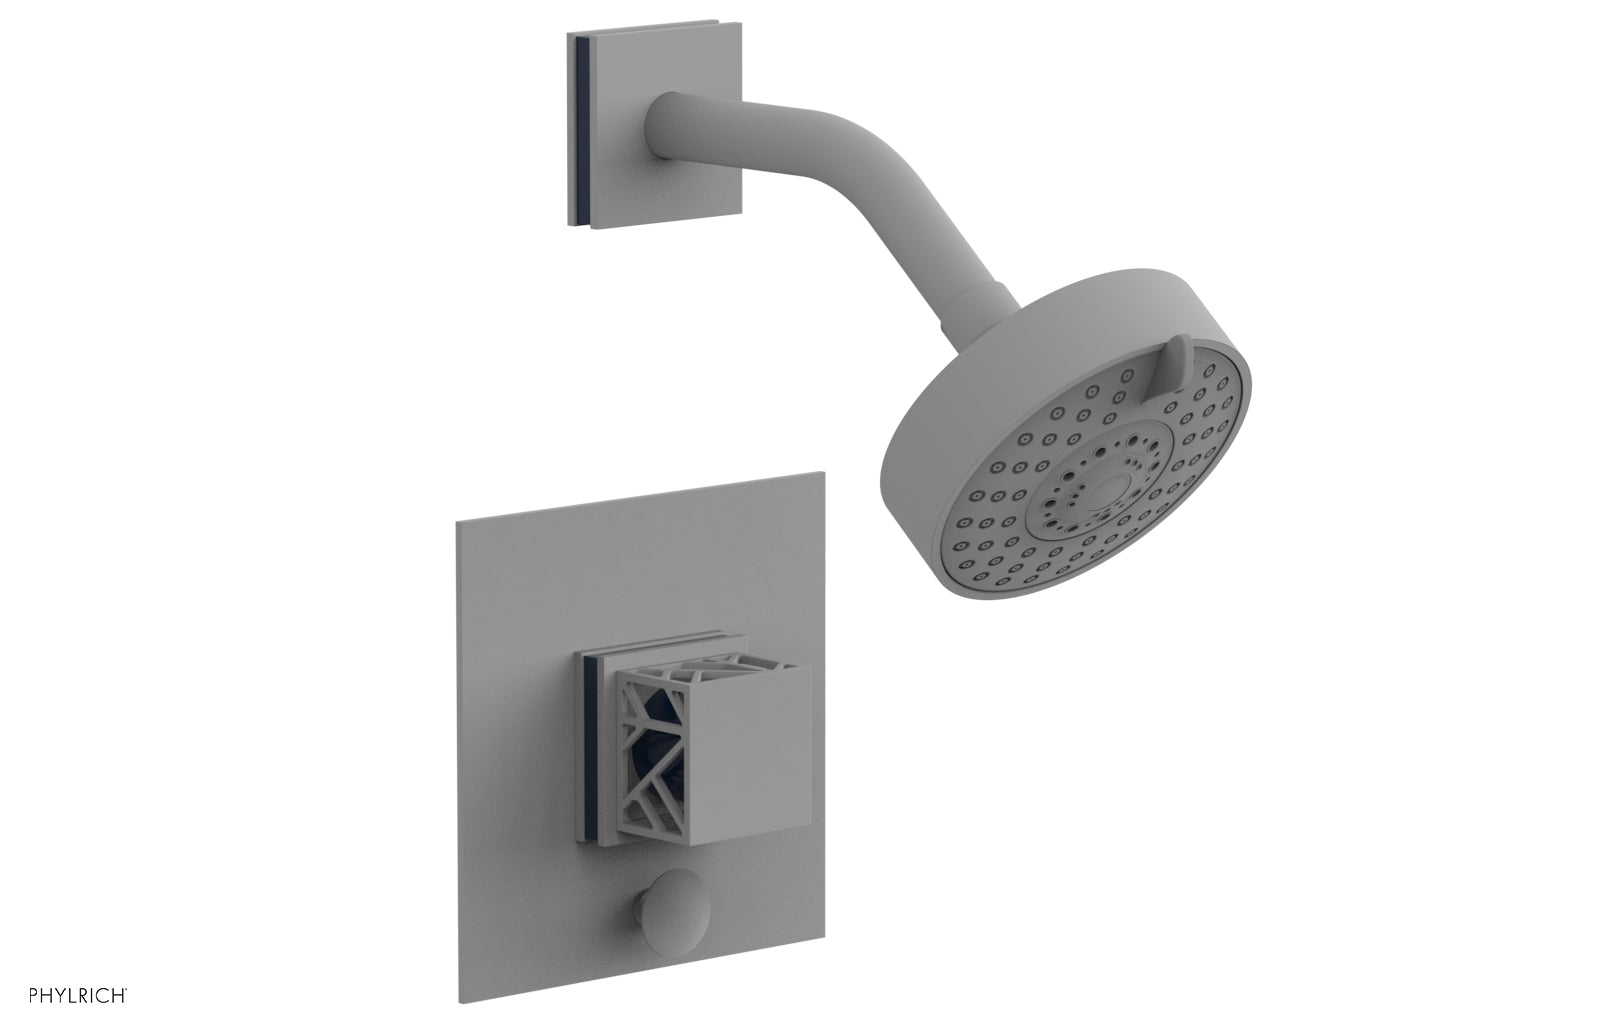 Phylrich JOLIE Pressure Balance Shower and Diverter Set (Less Spout), Square Handle with "Navy Blue" Accents